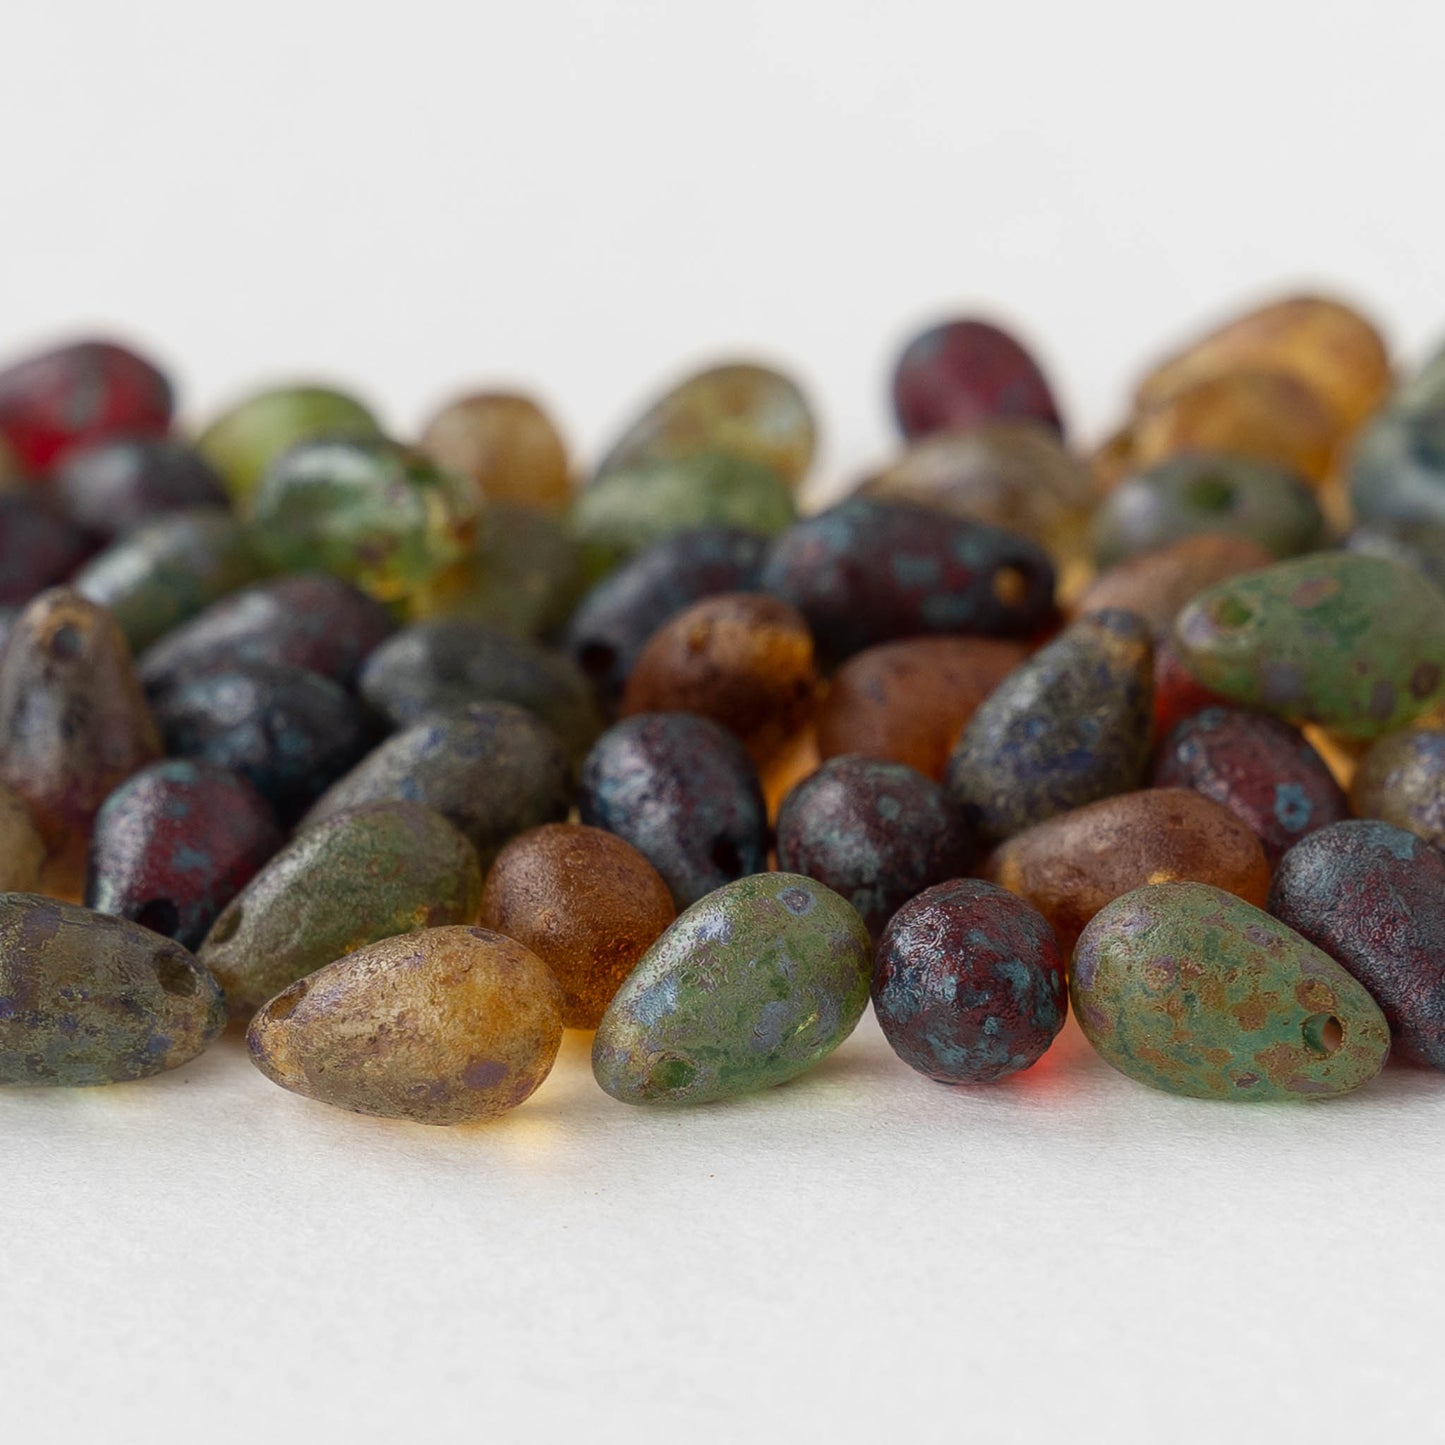 6x9mm Glass Teardrop Beads - Picasso Mix - 30 Beads